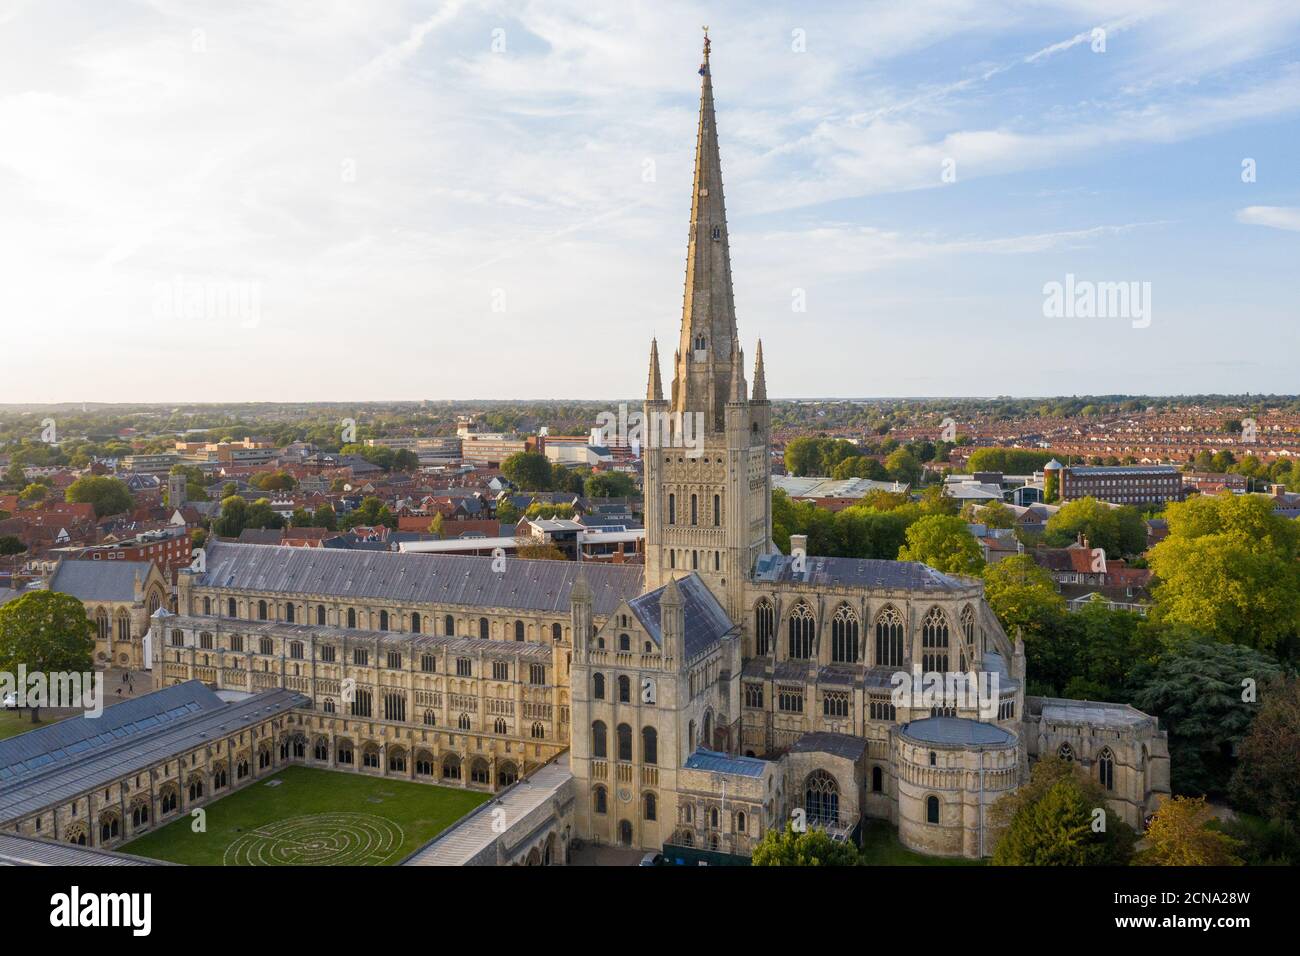 A view of Norwich Cathedral as the weathercock is reinstalled at the top of the spire after it was re-gilded as part of the restoration work on the spire which stands at over 312ft high. Stock Photo